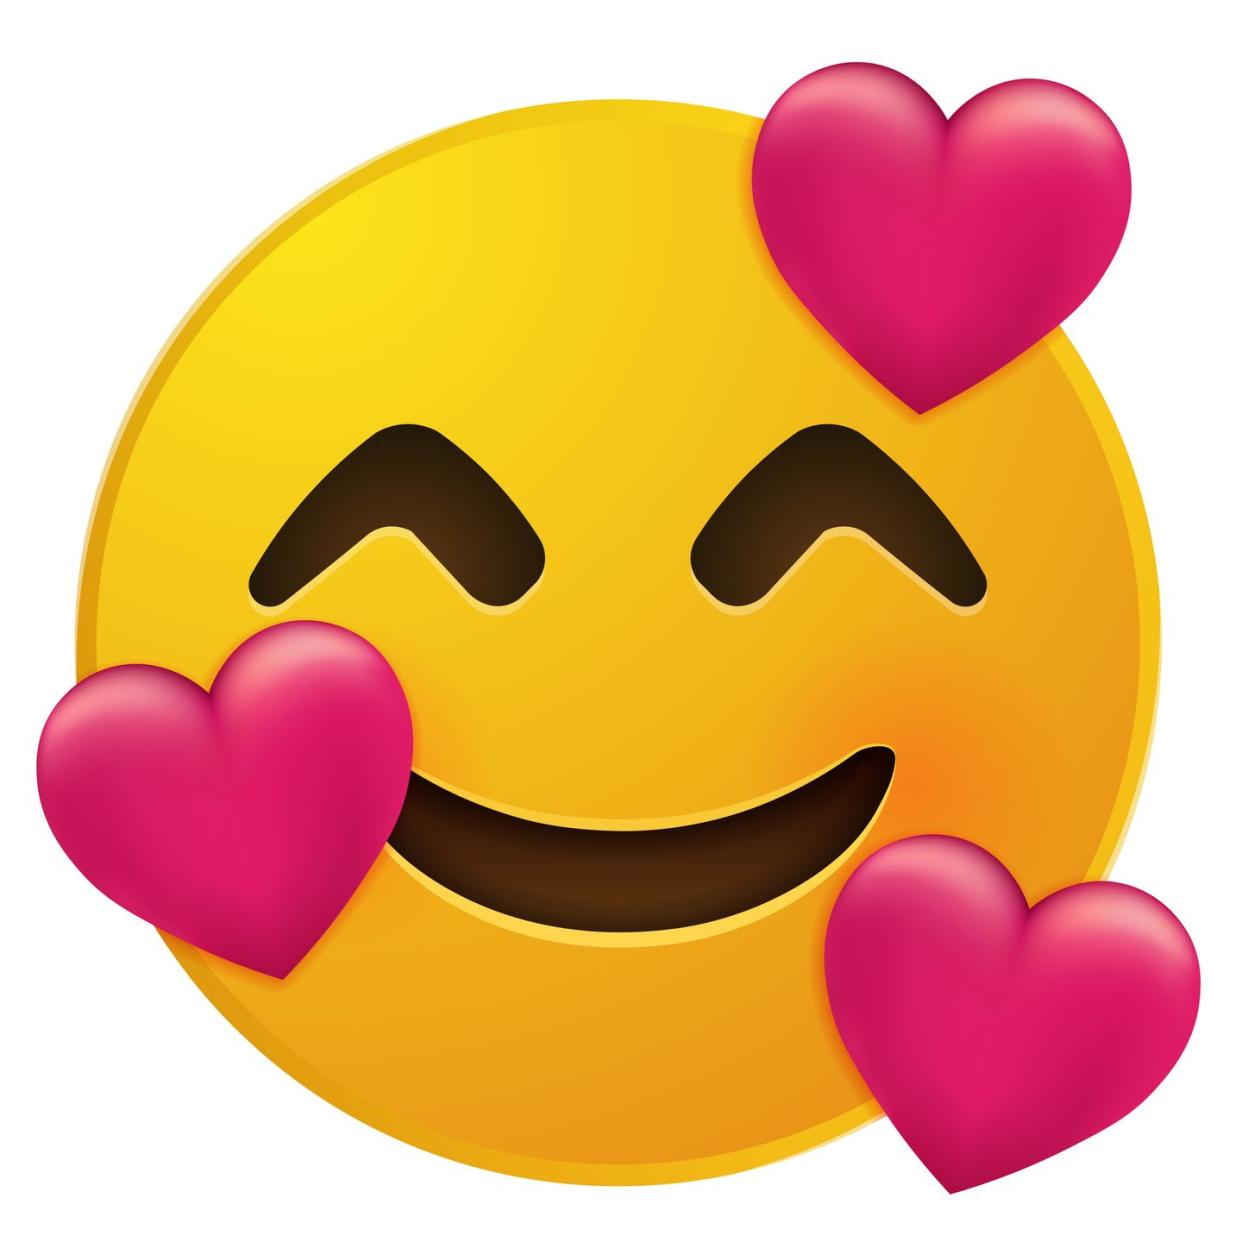 yellow smiling face emoji with smiling eyes and three hearts